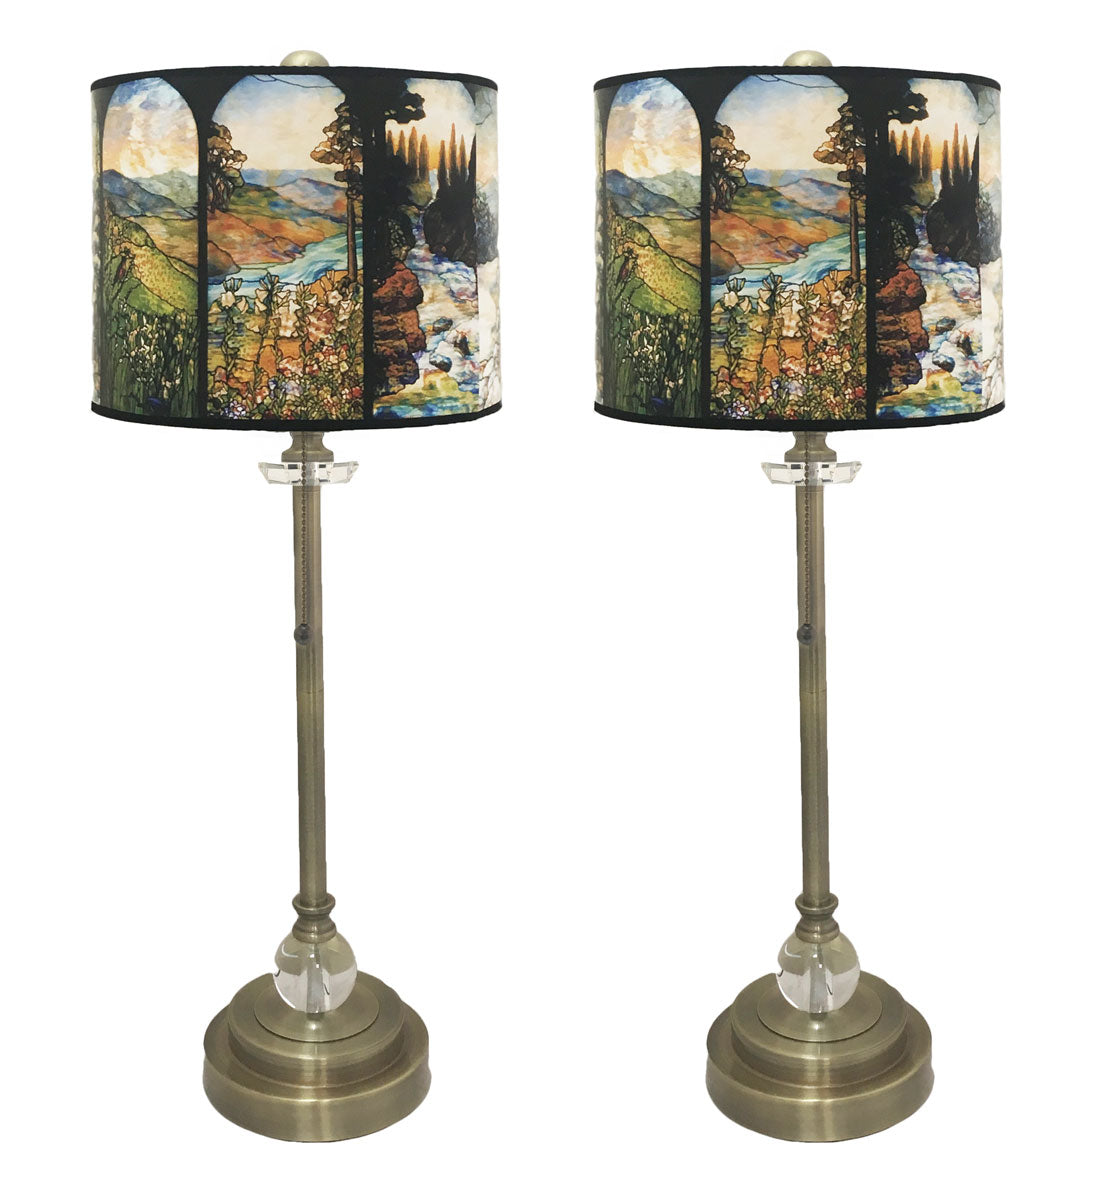 Royal Designs 28" Crystal and Antique Brass Buffet Lamp with Four Seasons Stained Glass Design Hard Back Lamp Shade, Set of 2